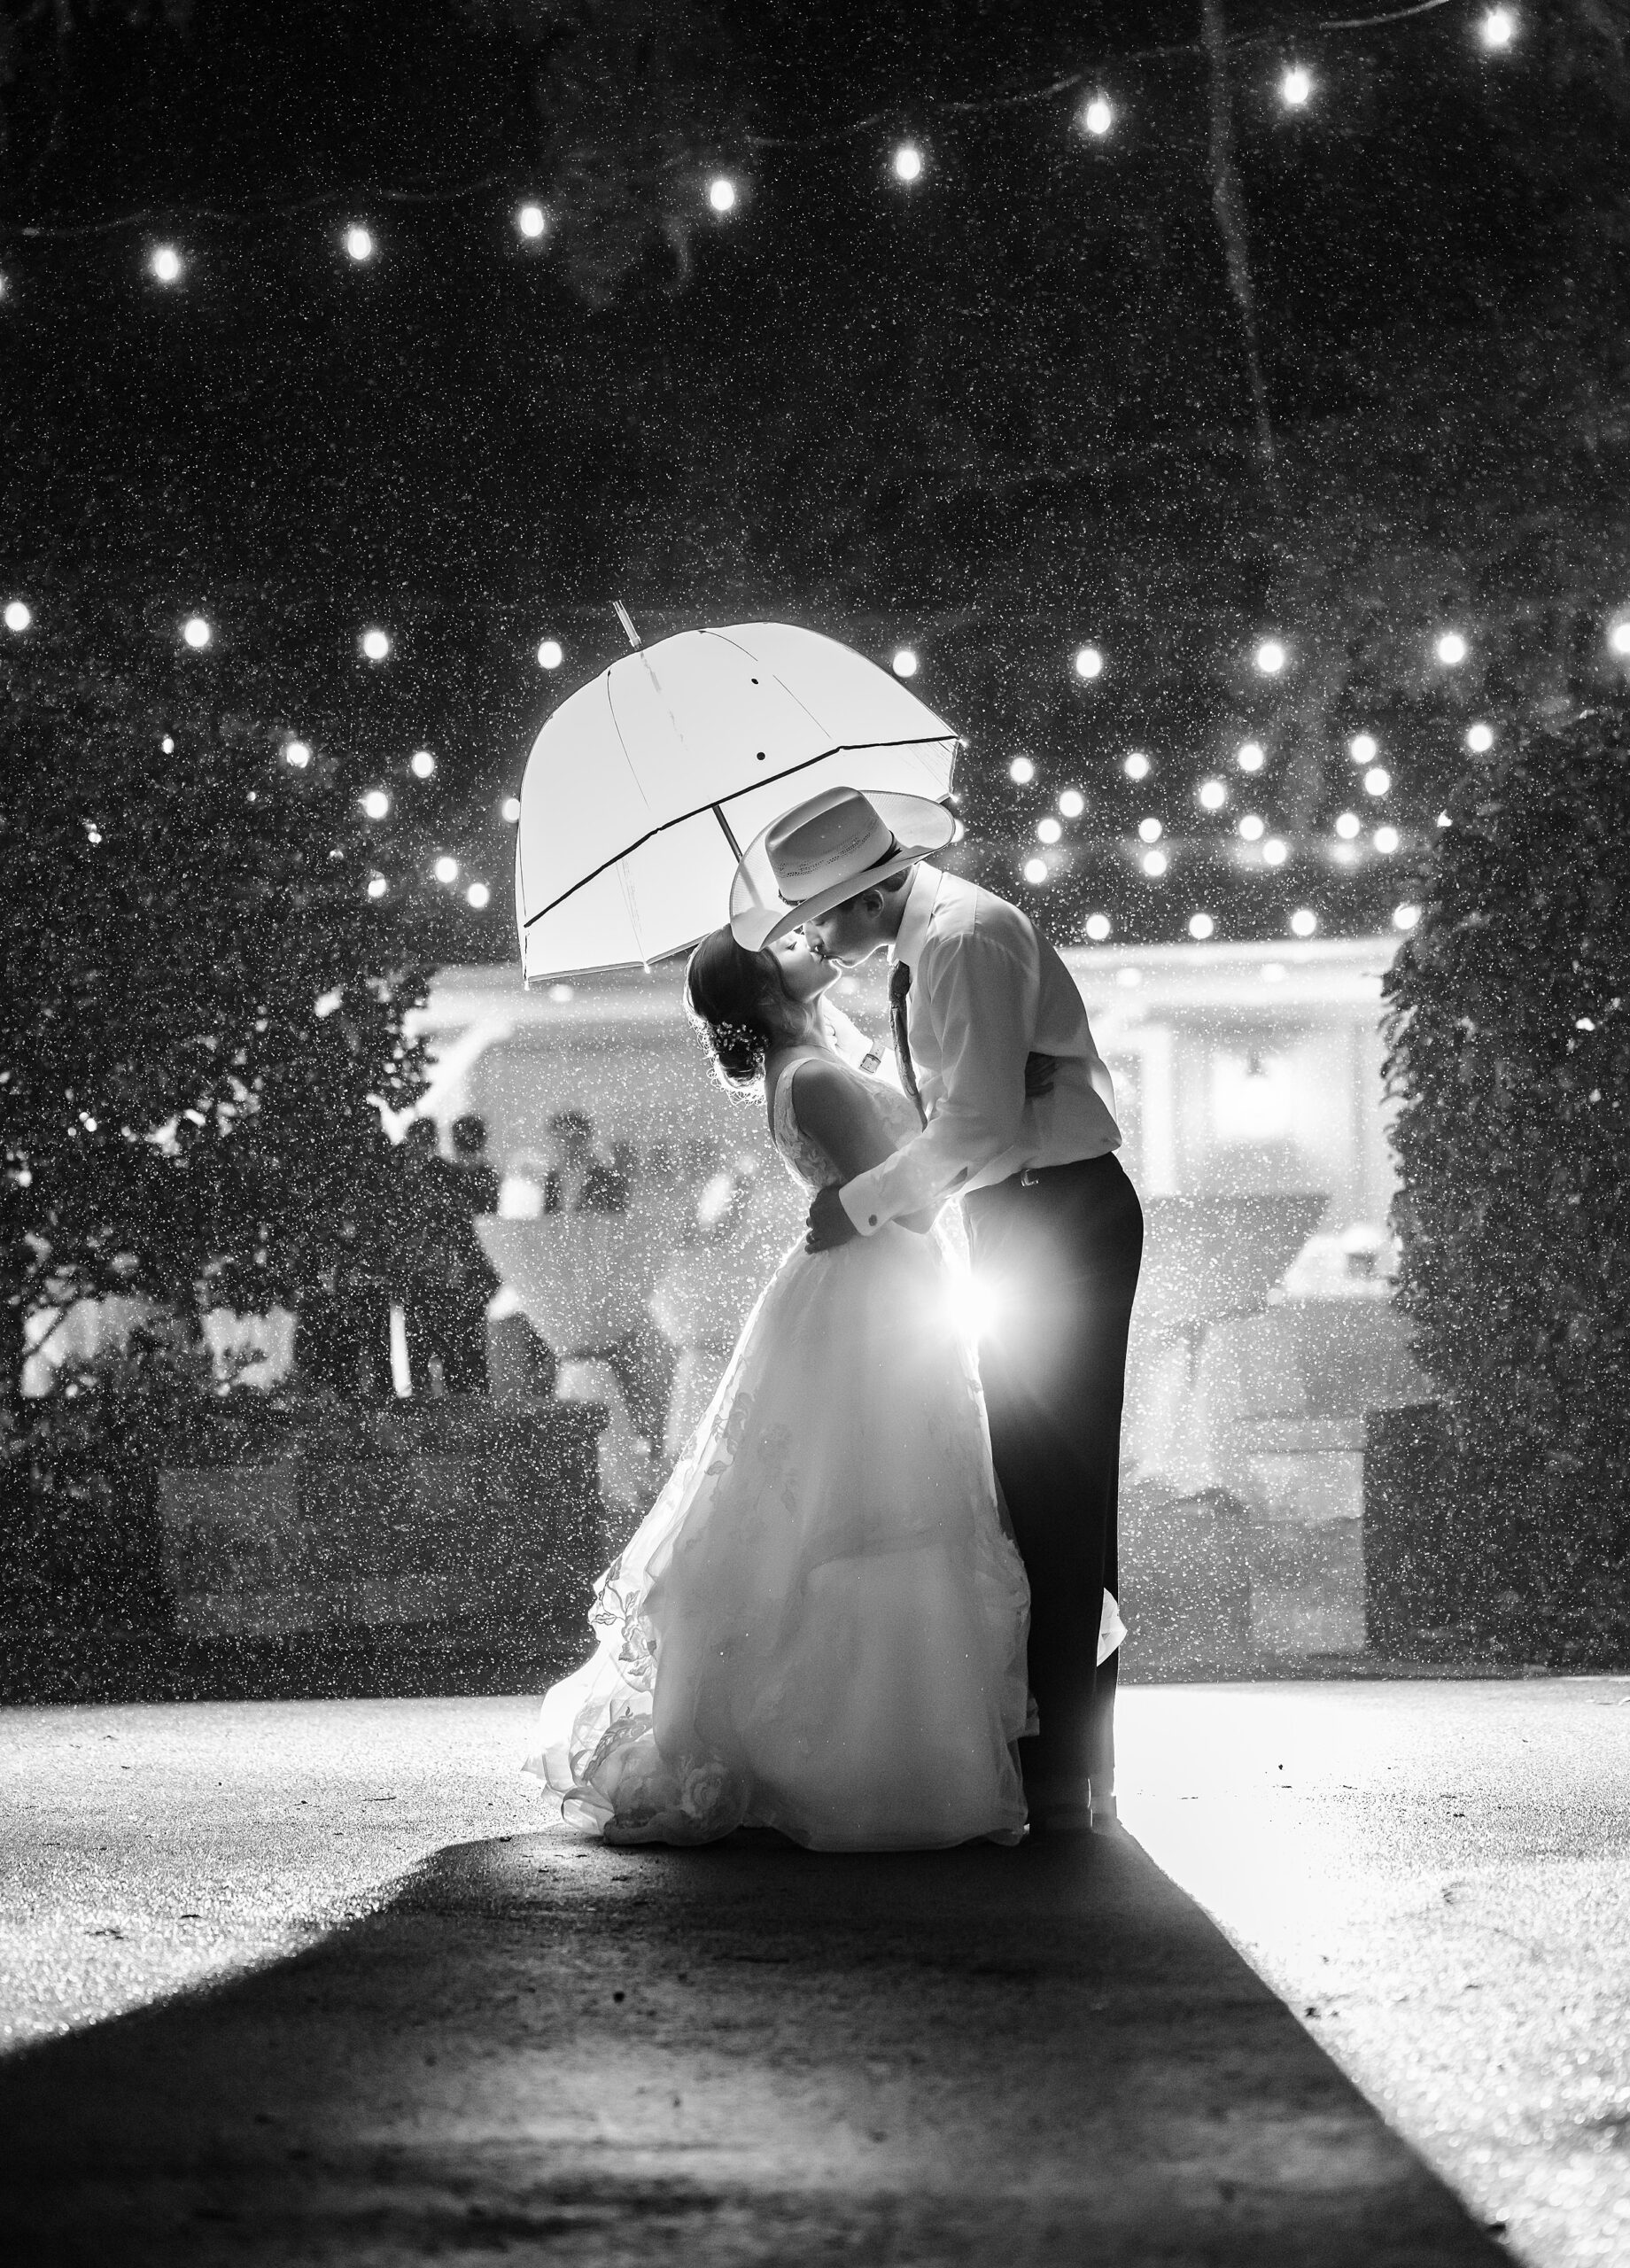 Newlyweds kiss under an umbrella in the rain on the patio of their bowing oaks wedding